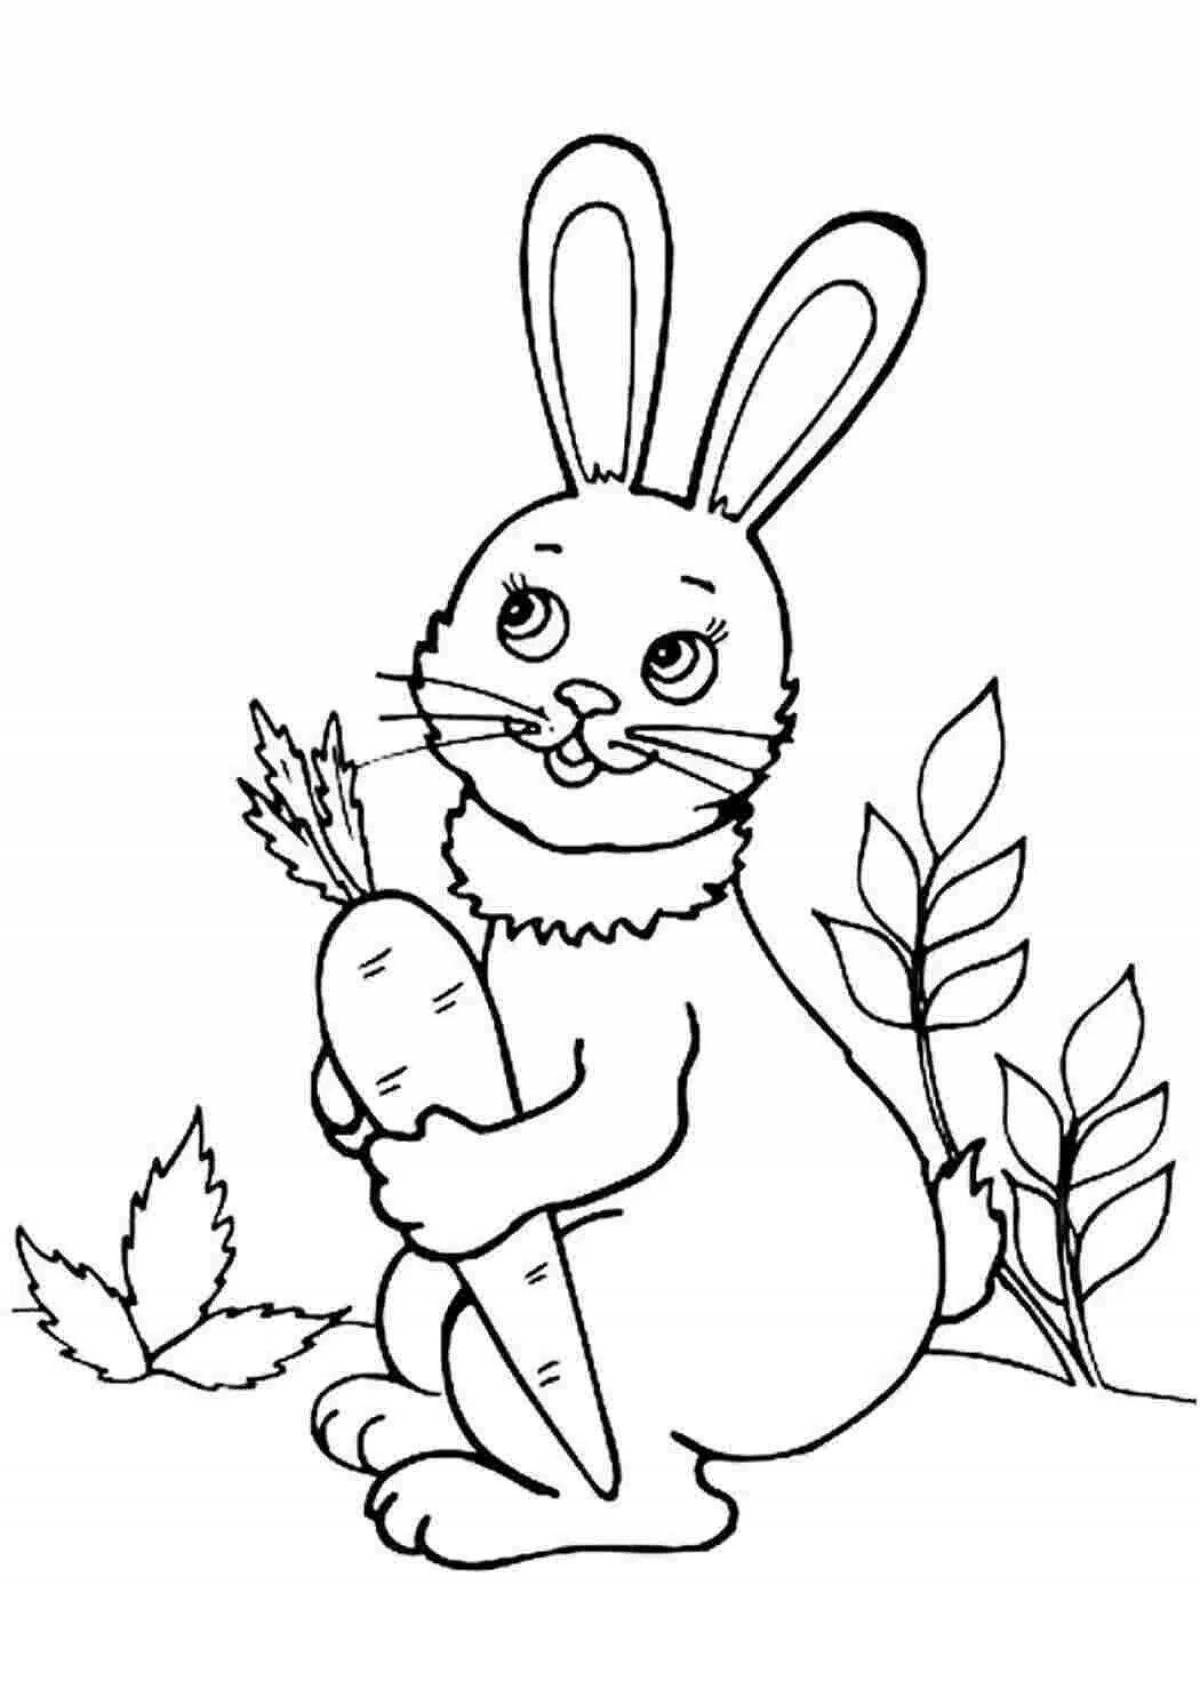 Coloring book funny rabbit with a carrot